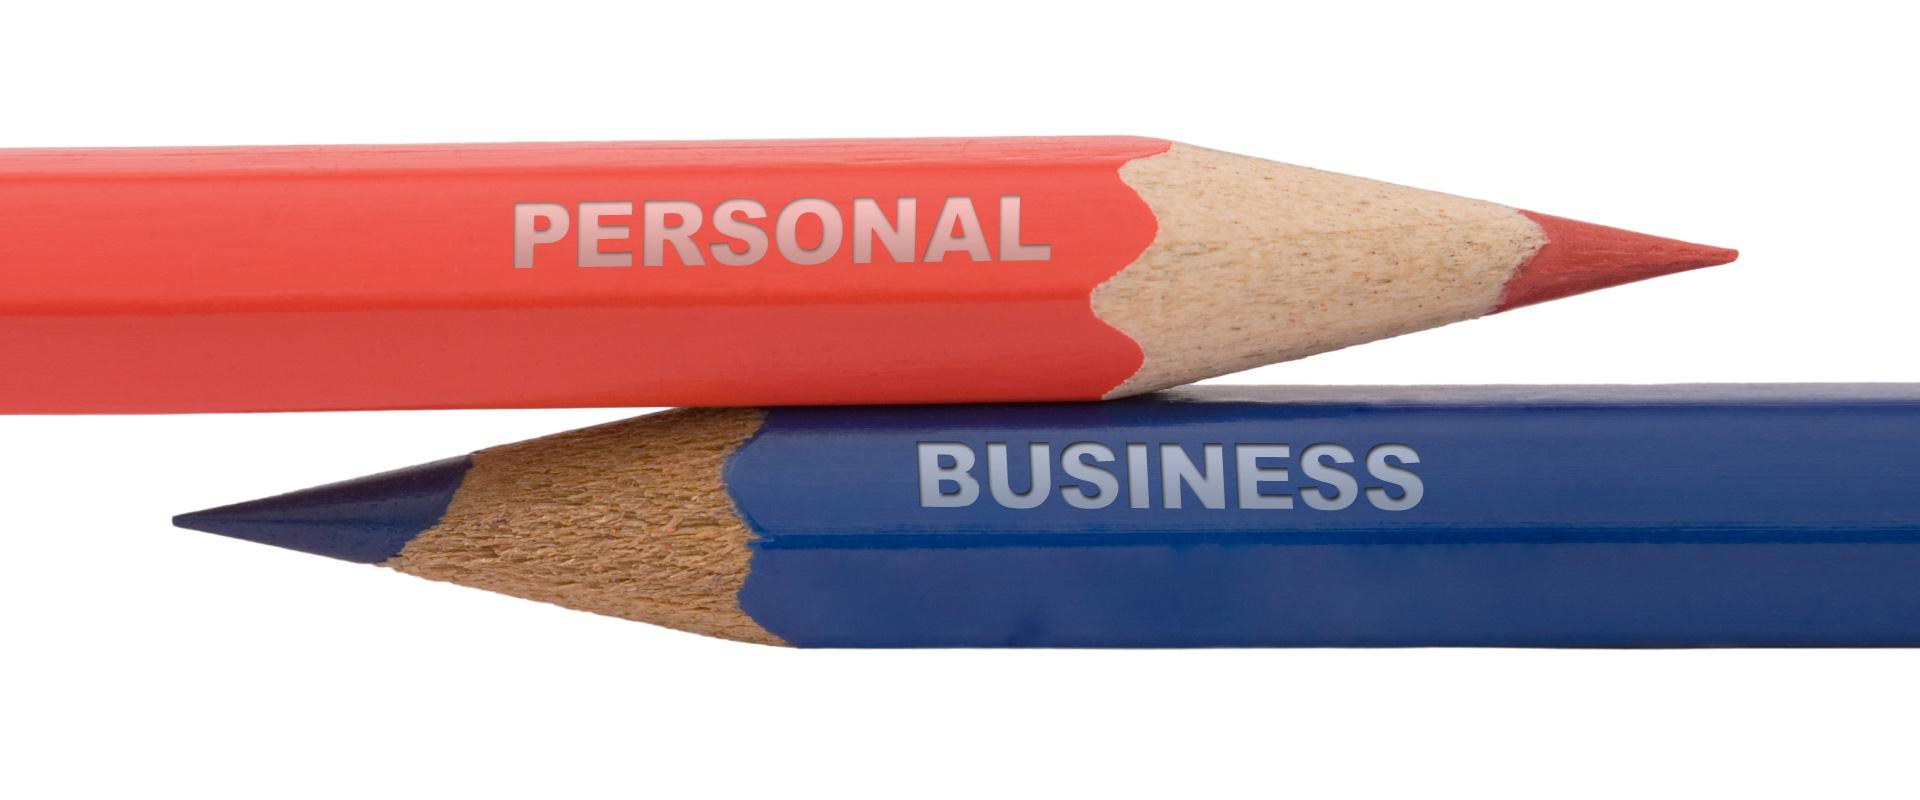 business vs. personal